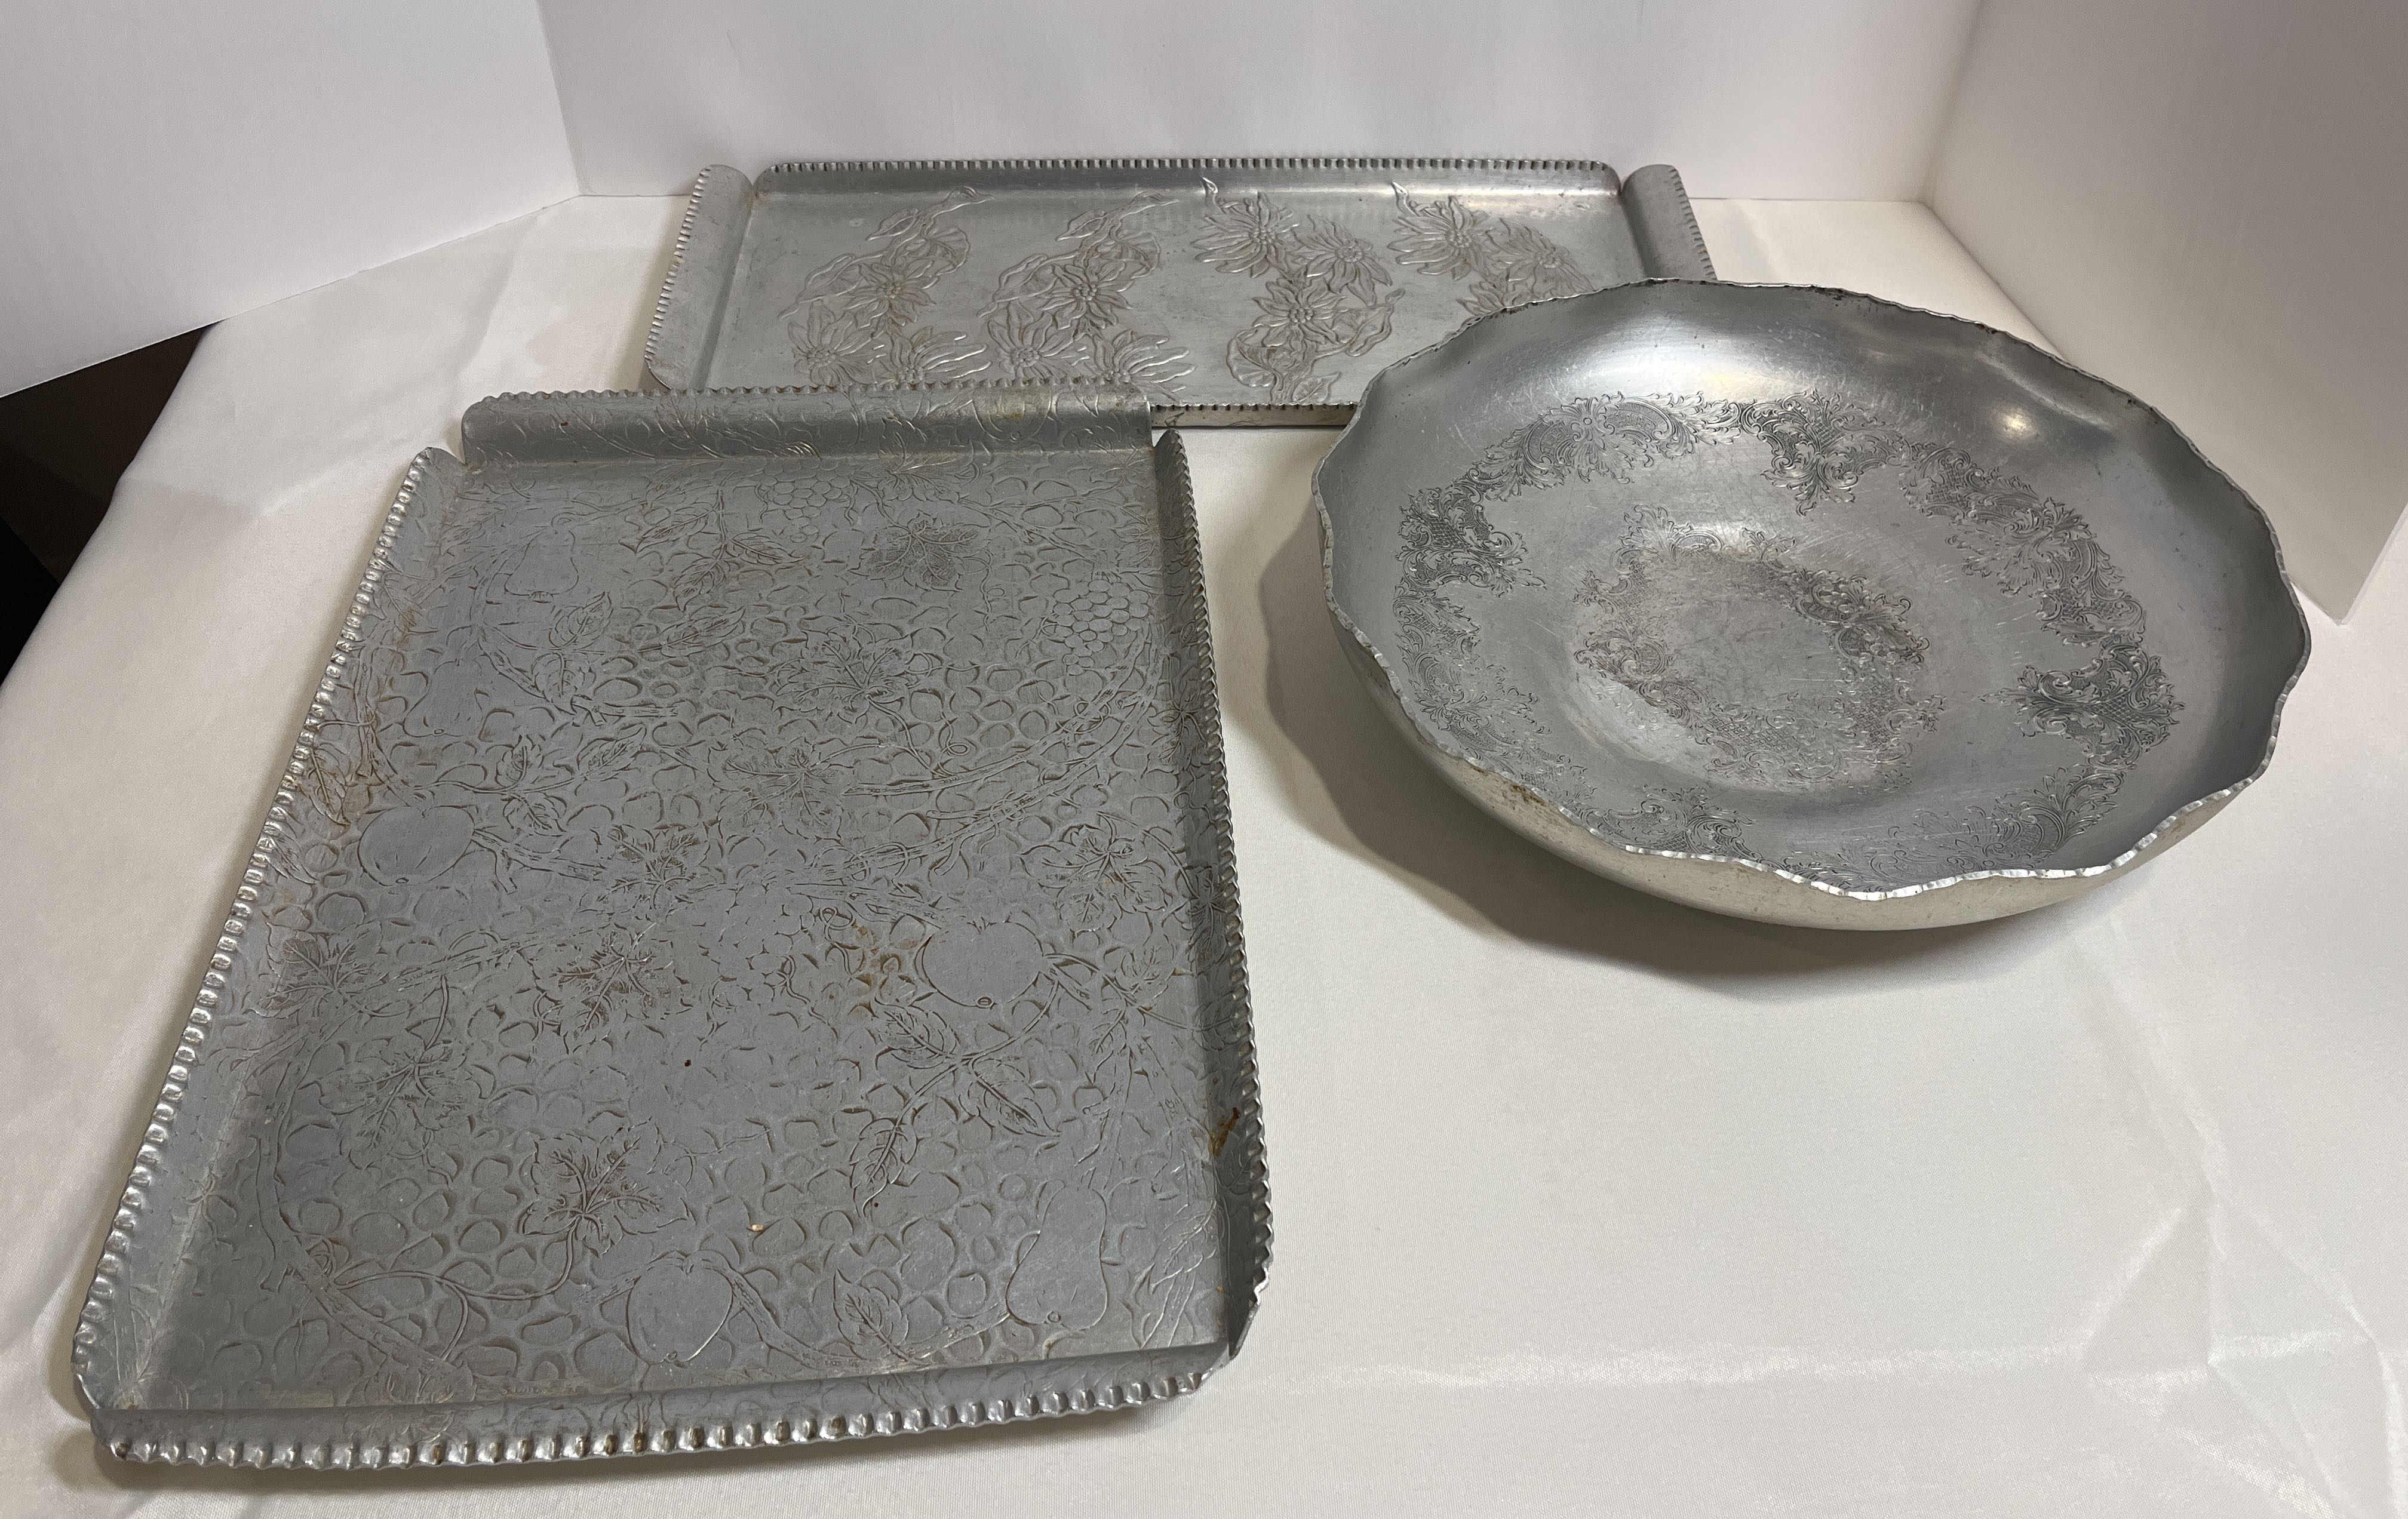 Sold at Auction: 3 Vintage Aluminum Ice Trays